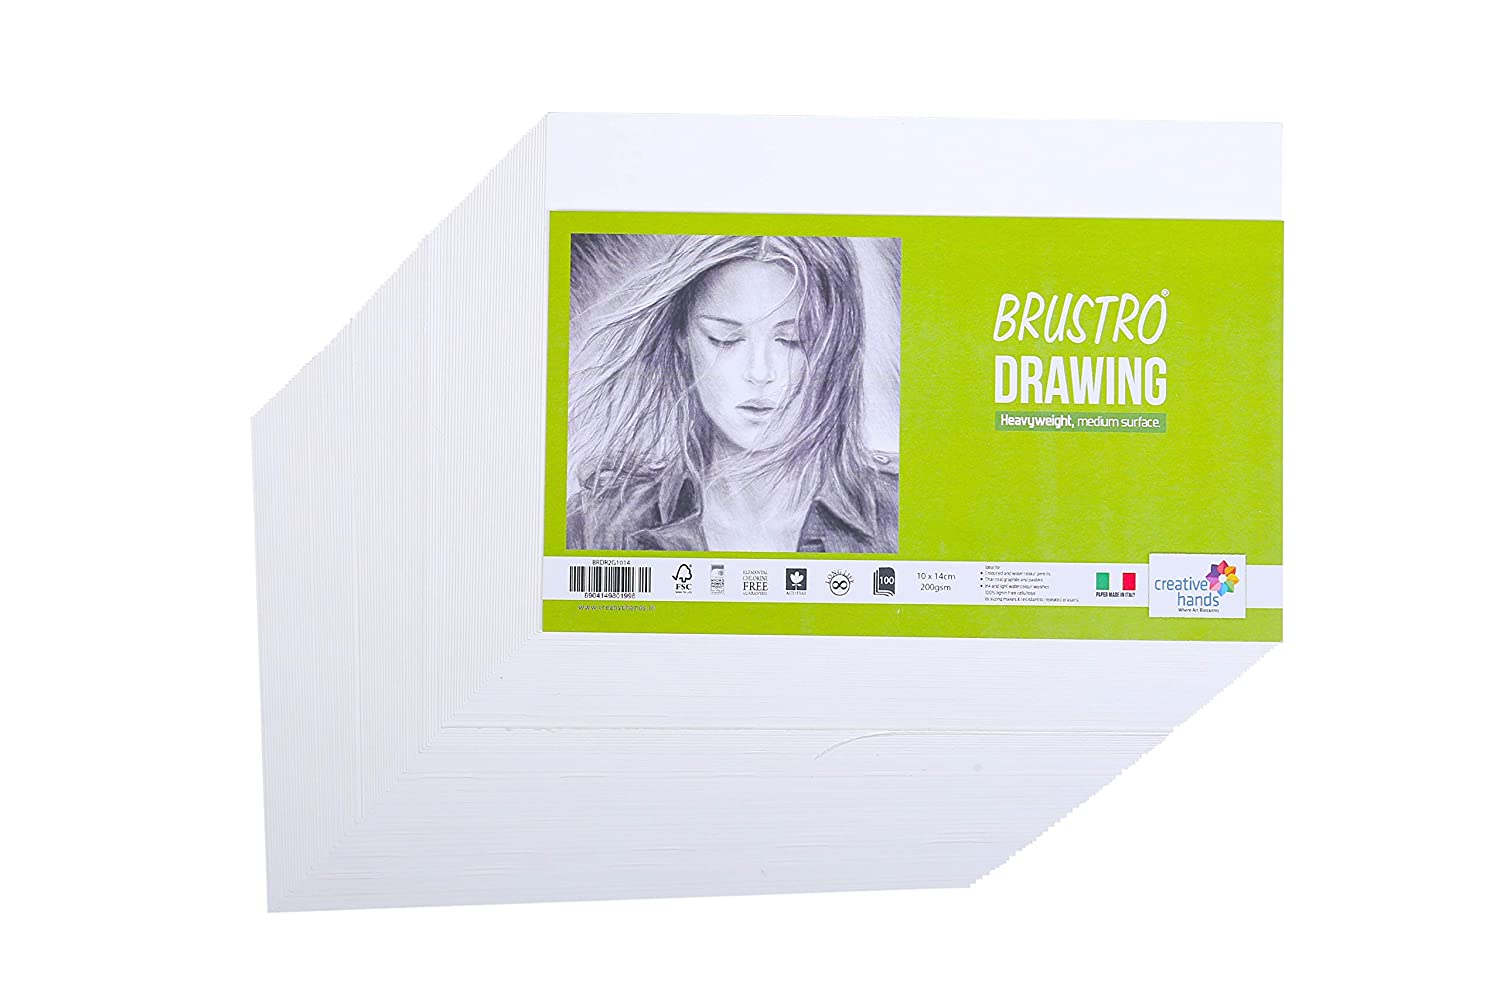 Sketch paper unboxing and Review | Brustro paper unboxing | - YouTube